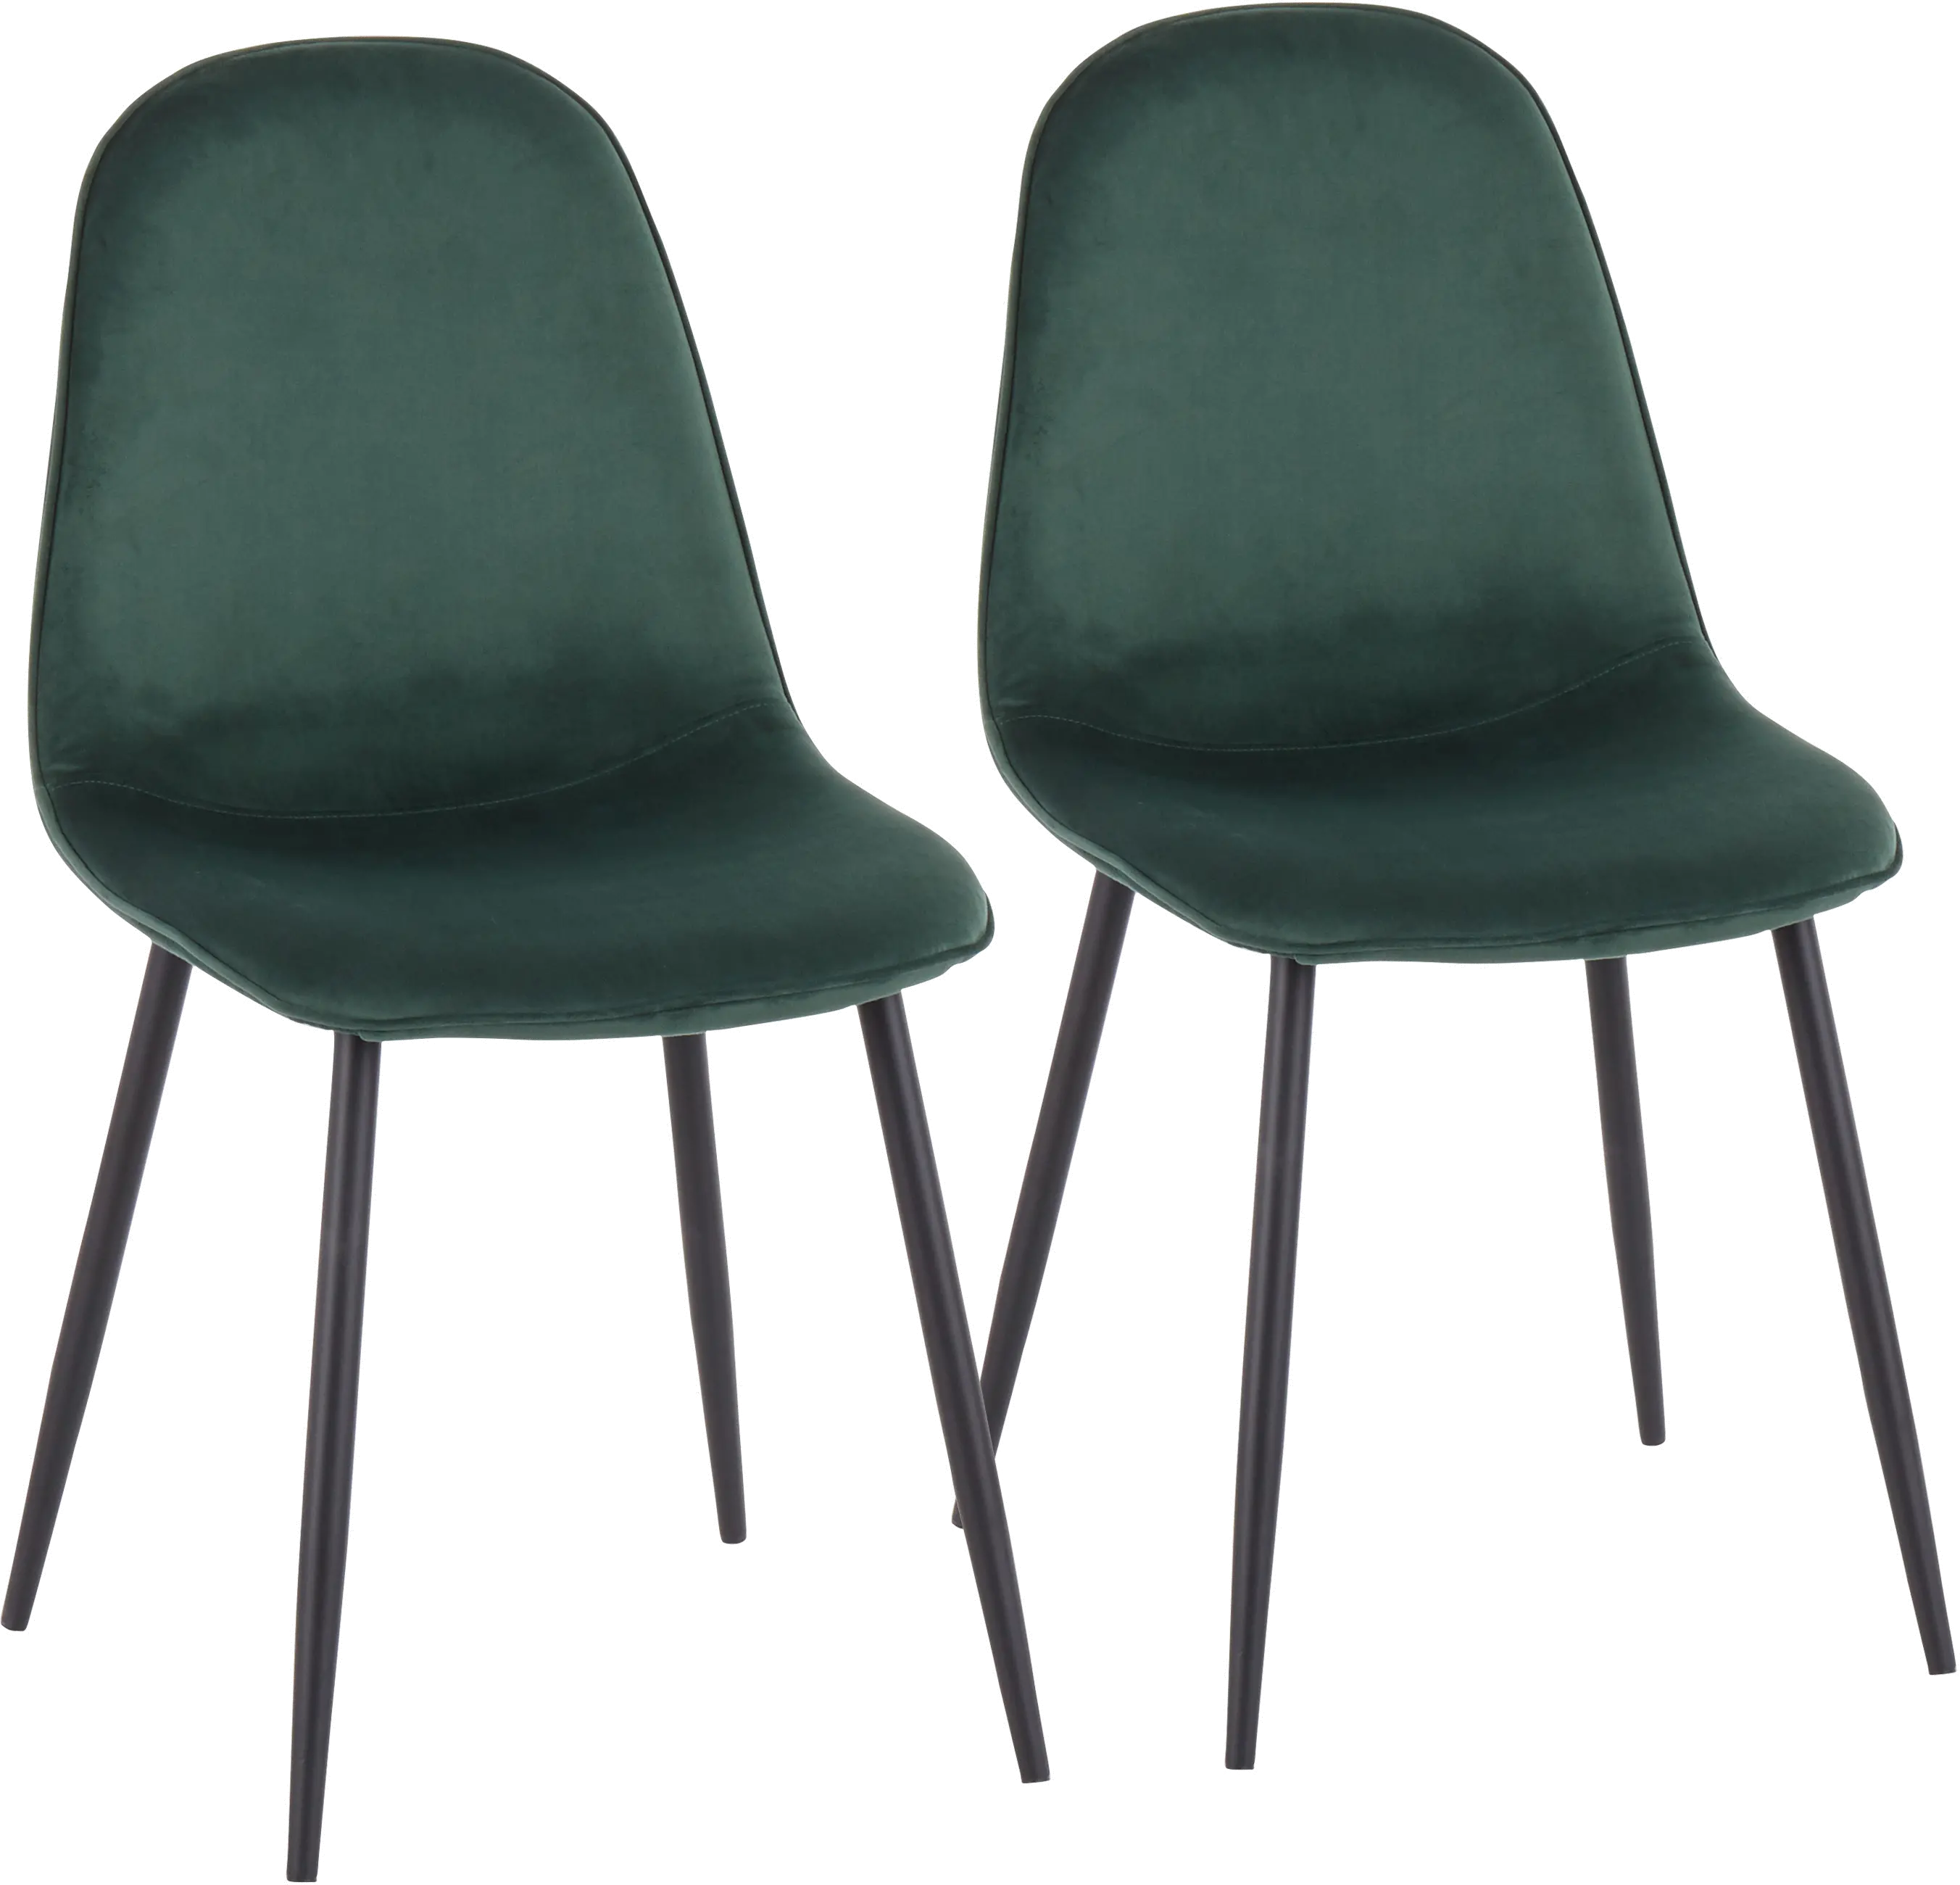 CH-PEBBLEBKVGN2 Pebble Green and Black Dining Room Chair (Set of 2 sku CH-PEBBLEBKVGN2